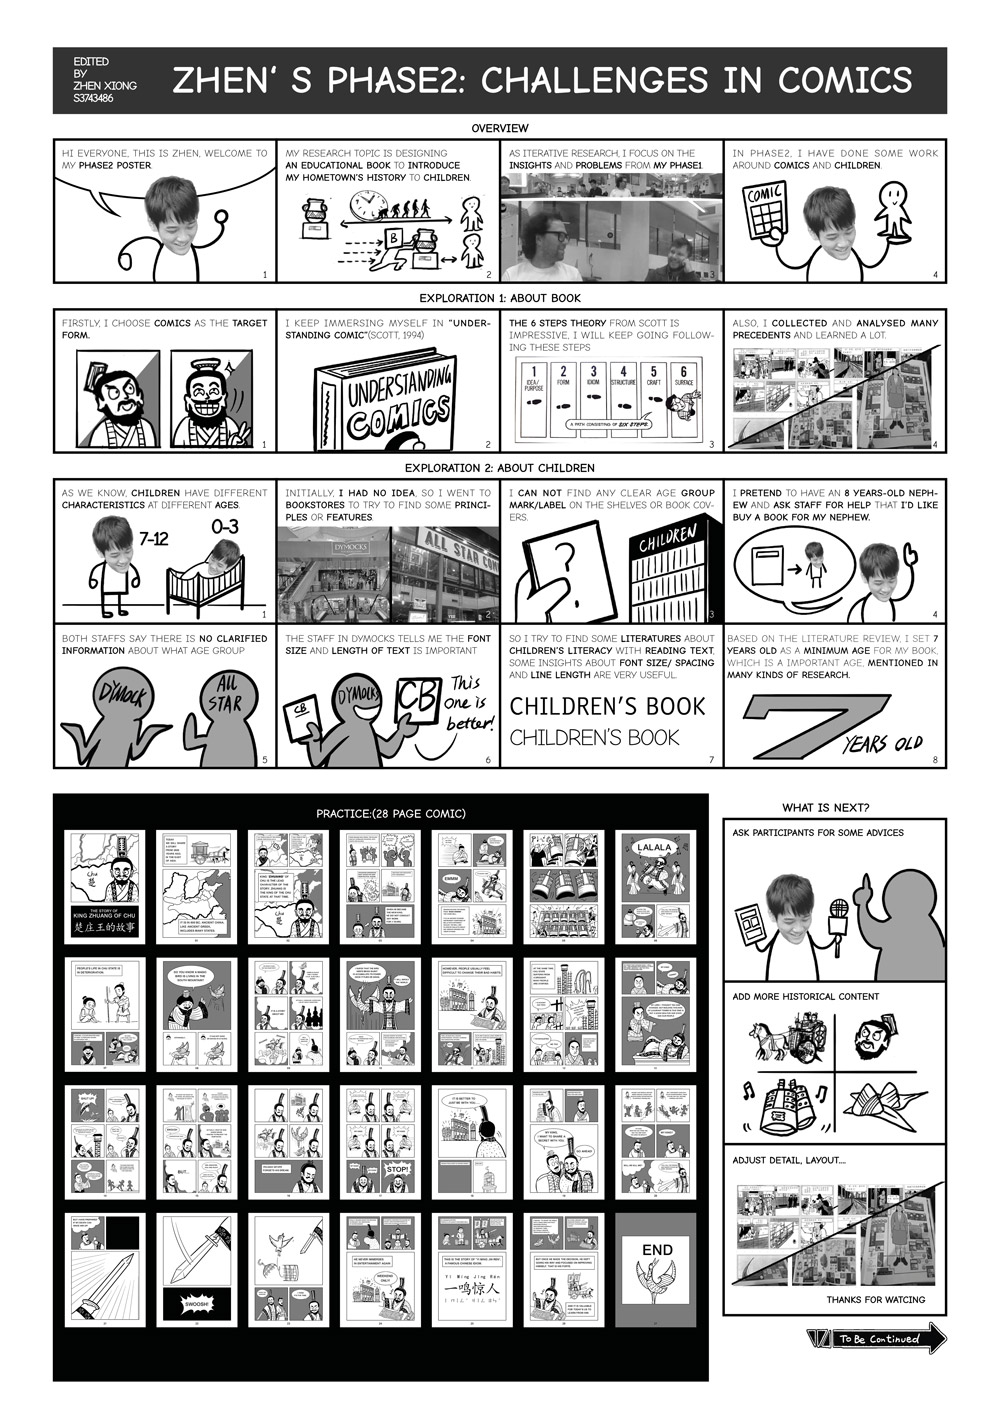 This phase aimed to Investigate children's features and practice relevant making comics theories. This phase revealed that children's legibility depends on their ages. Children's comics' character design can be exaggerated without following the actual children's body proportion. Designing the comic's characters and typography was essential based on the target groups' characteristics.